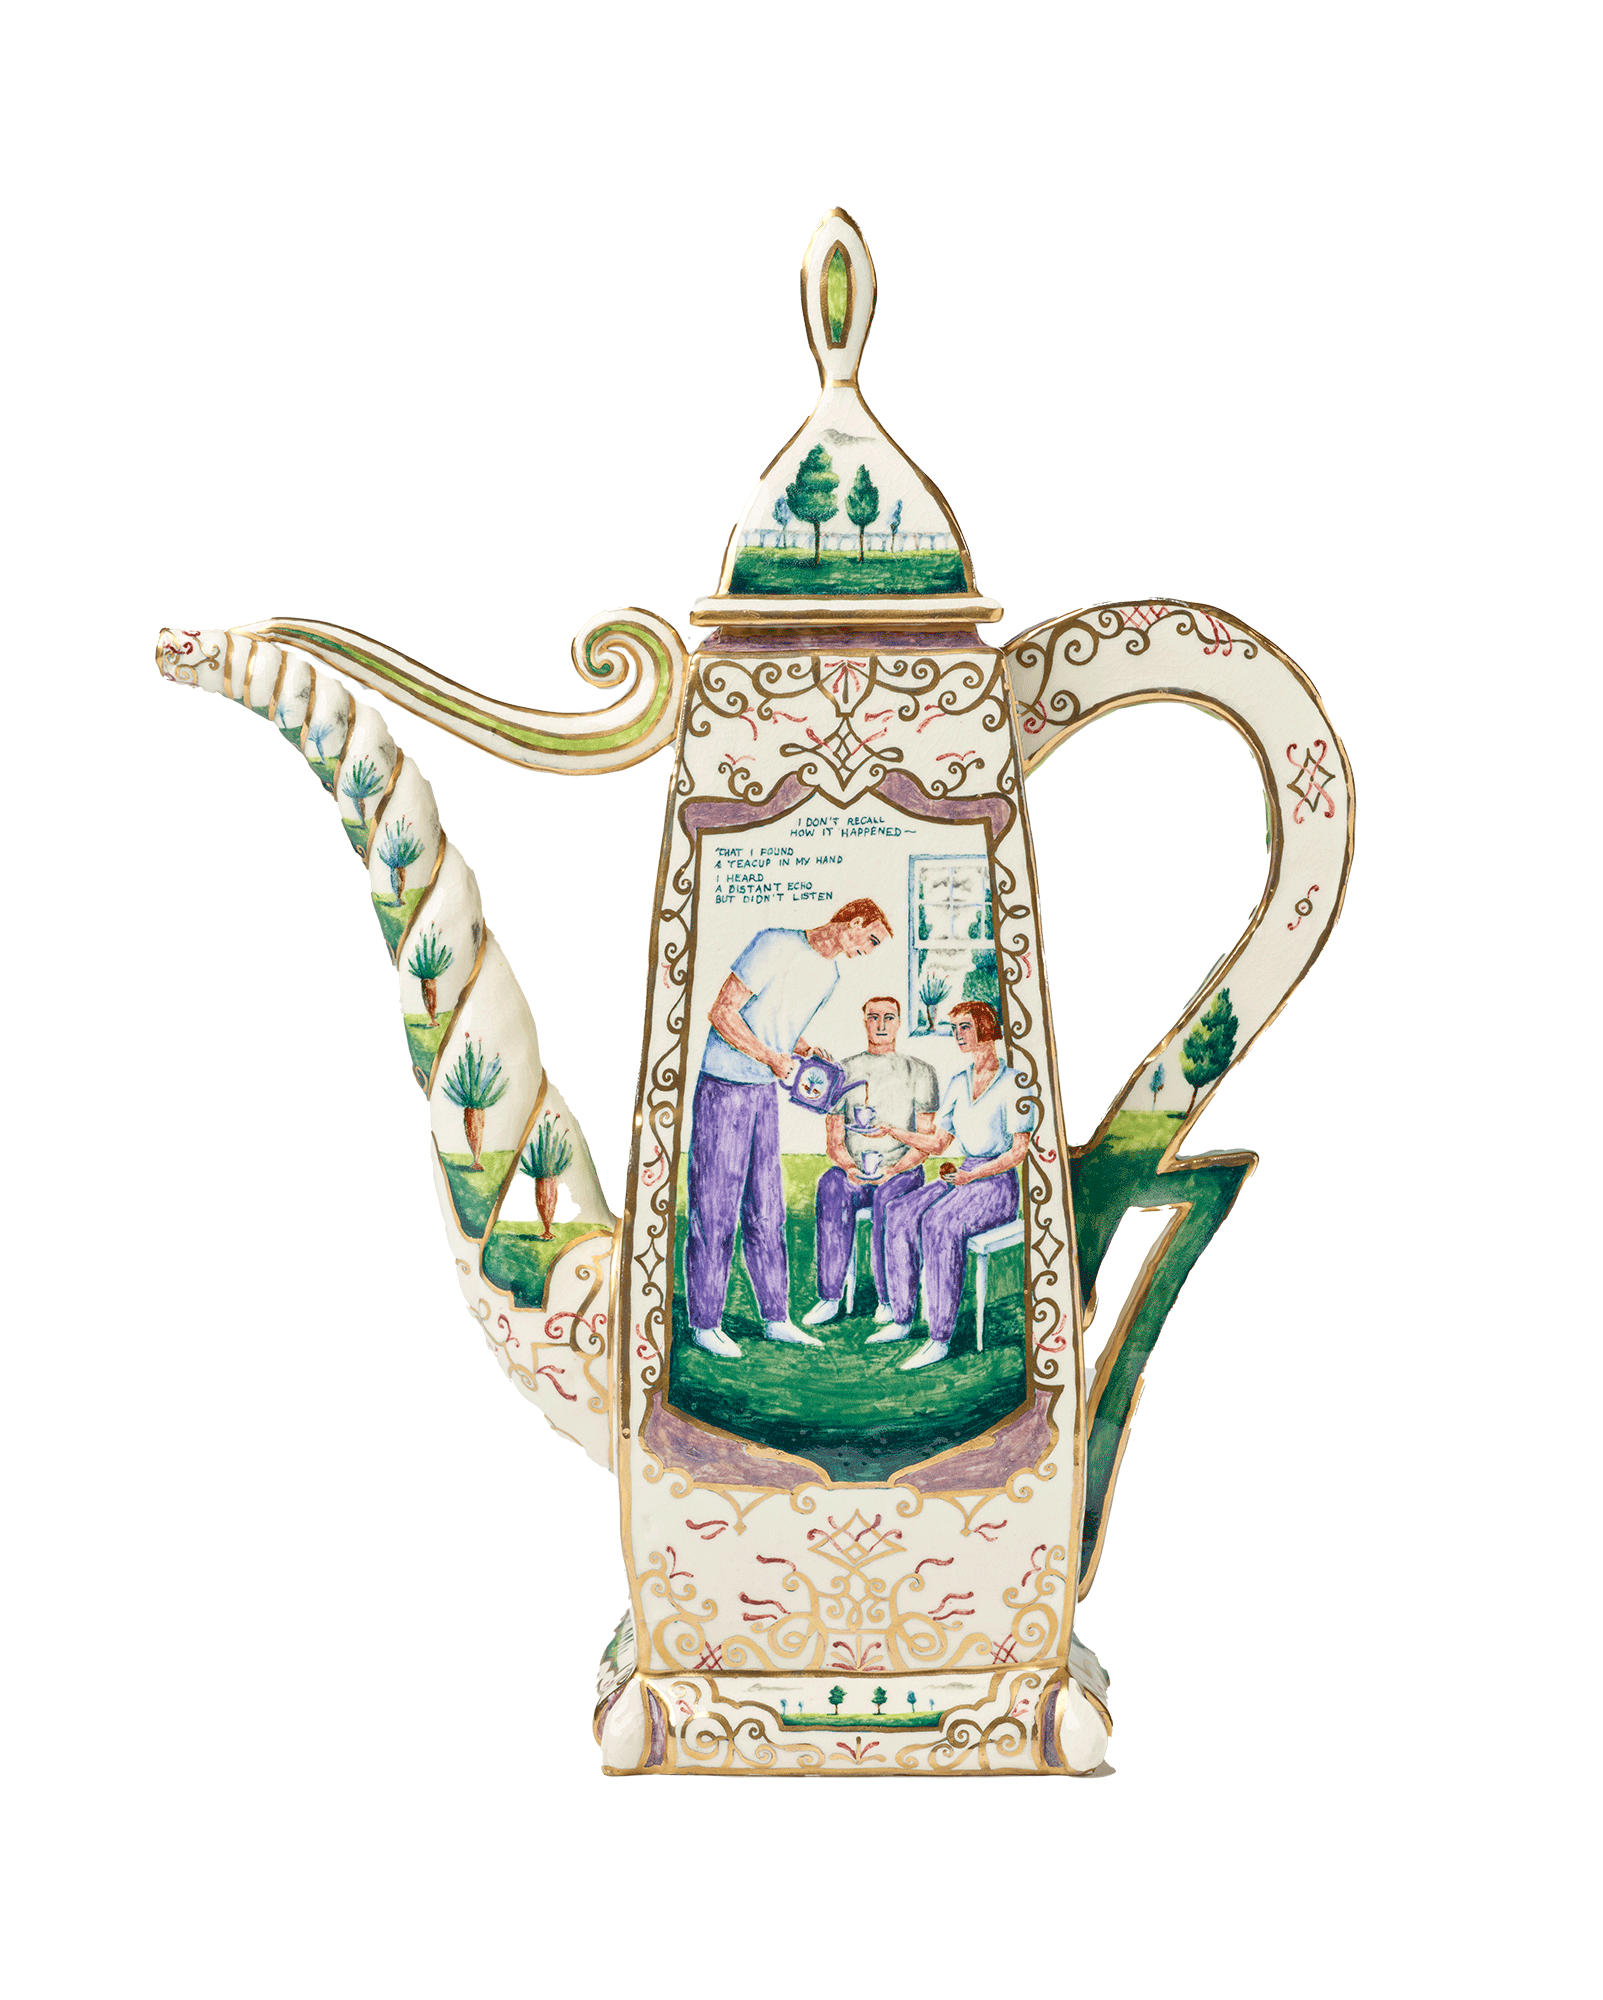 /A%20cream-colored%20teapot%20with%20gold%20designs.%20In%20the%20center%20image%2C%20a%20standing%20figure%20pours%20tea%20to%20two%20seated%20figures.%20Text%20above%20their%20heads%20reads%3A%20%E2%80%9CI%20don%E2%80%99t%20recall%20how%20it%20happened%5B%2C%5D%20that%20I%20found%20a%20teacup%20in%20my%20hand%5B%2C%5D%20I%20heard%20a%20distant%20echo%20but%20didn%E2%80%99t%20listen.%E2%80%9D